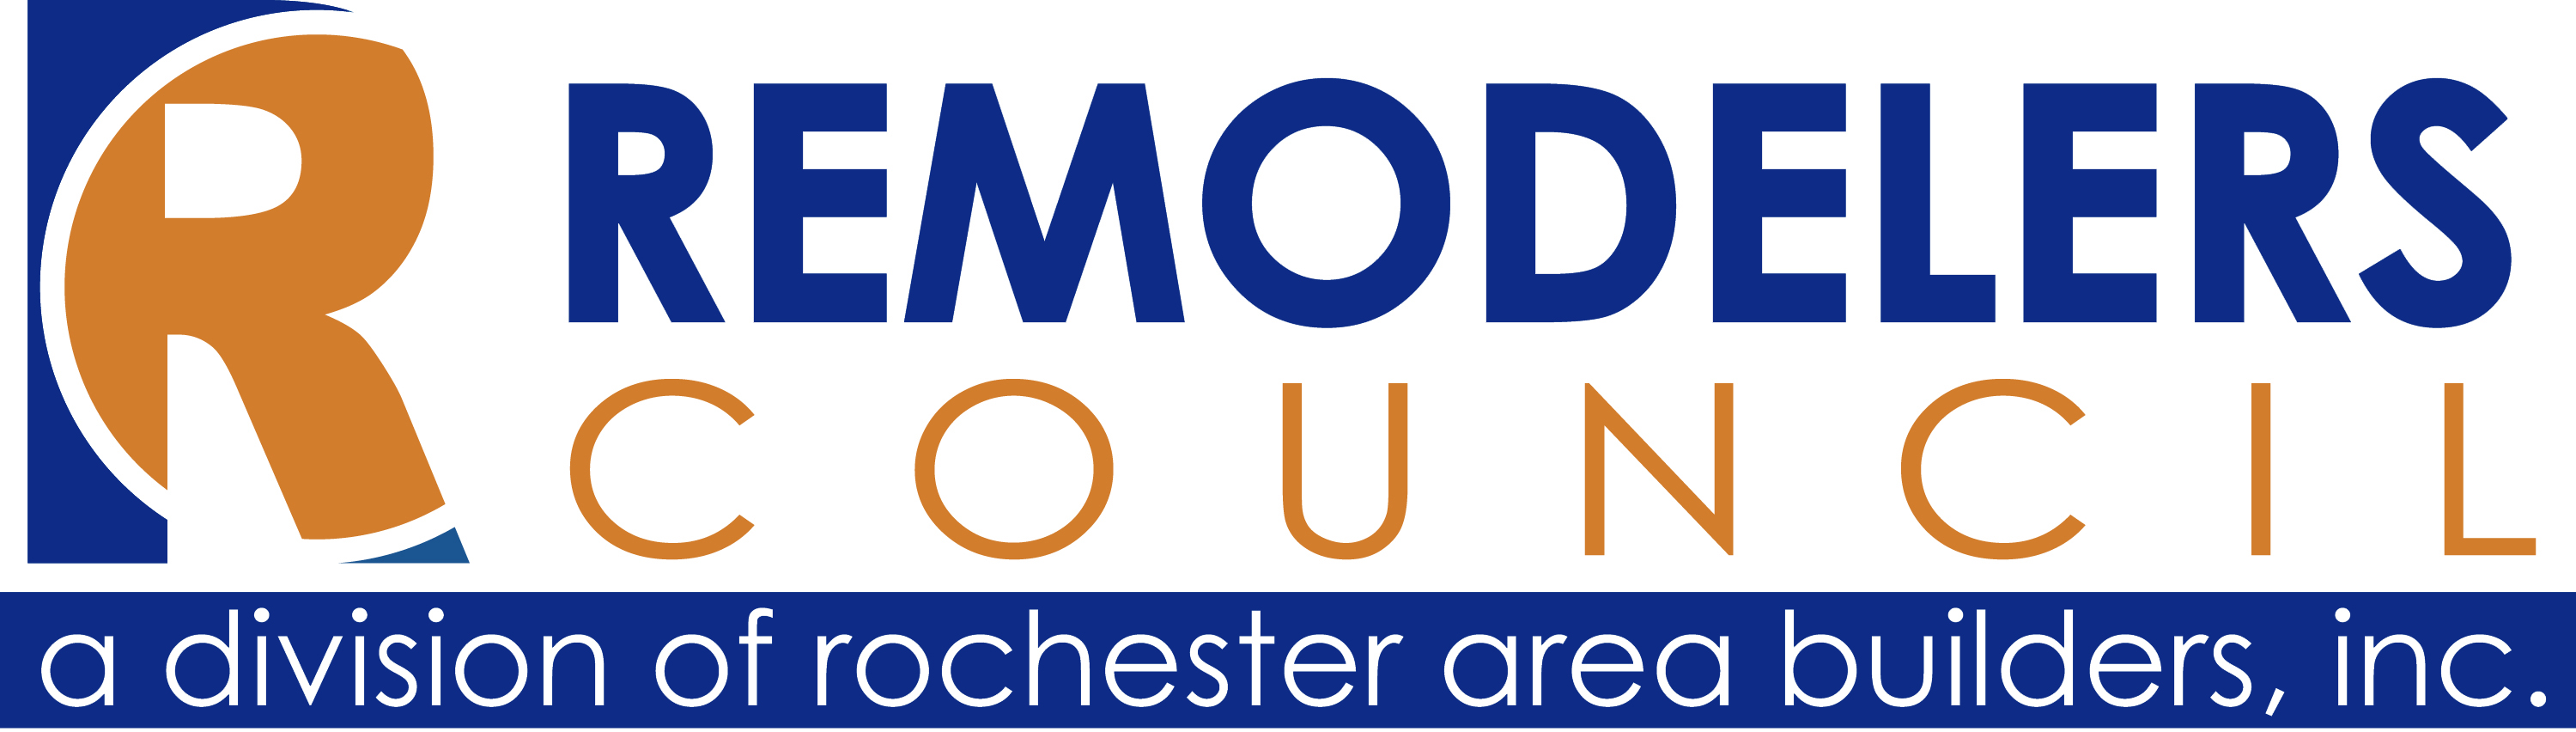 Remodelers Council logo